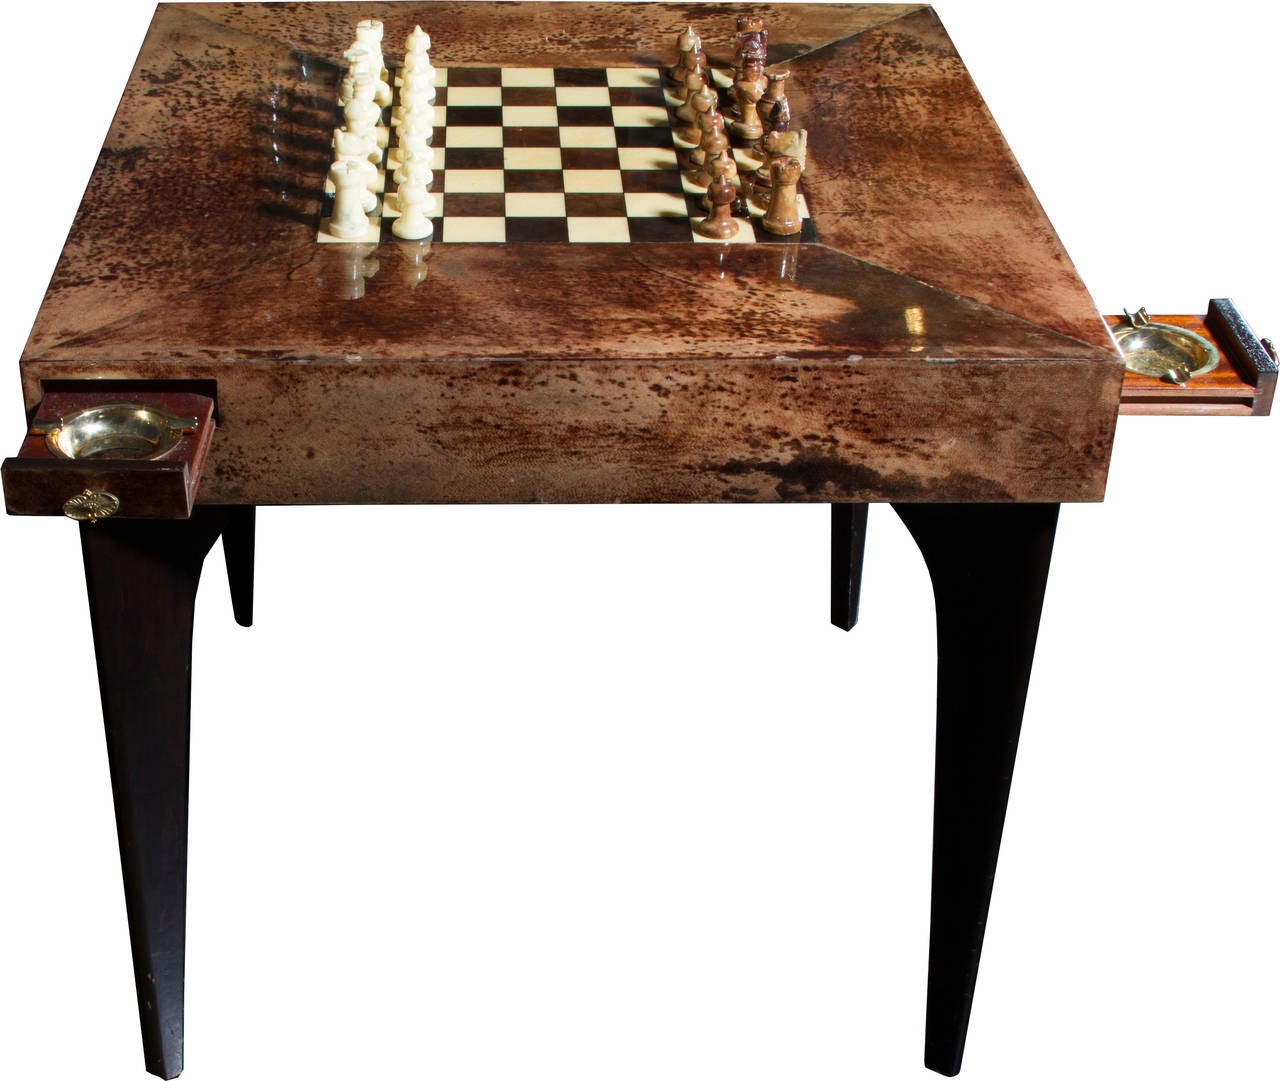 Aldo Tura Game Table and Chairs 1